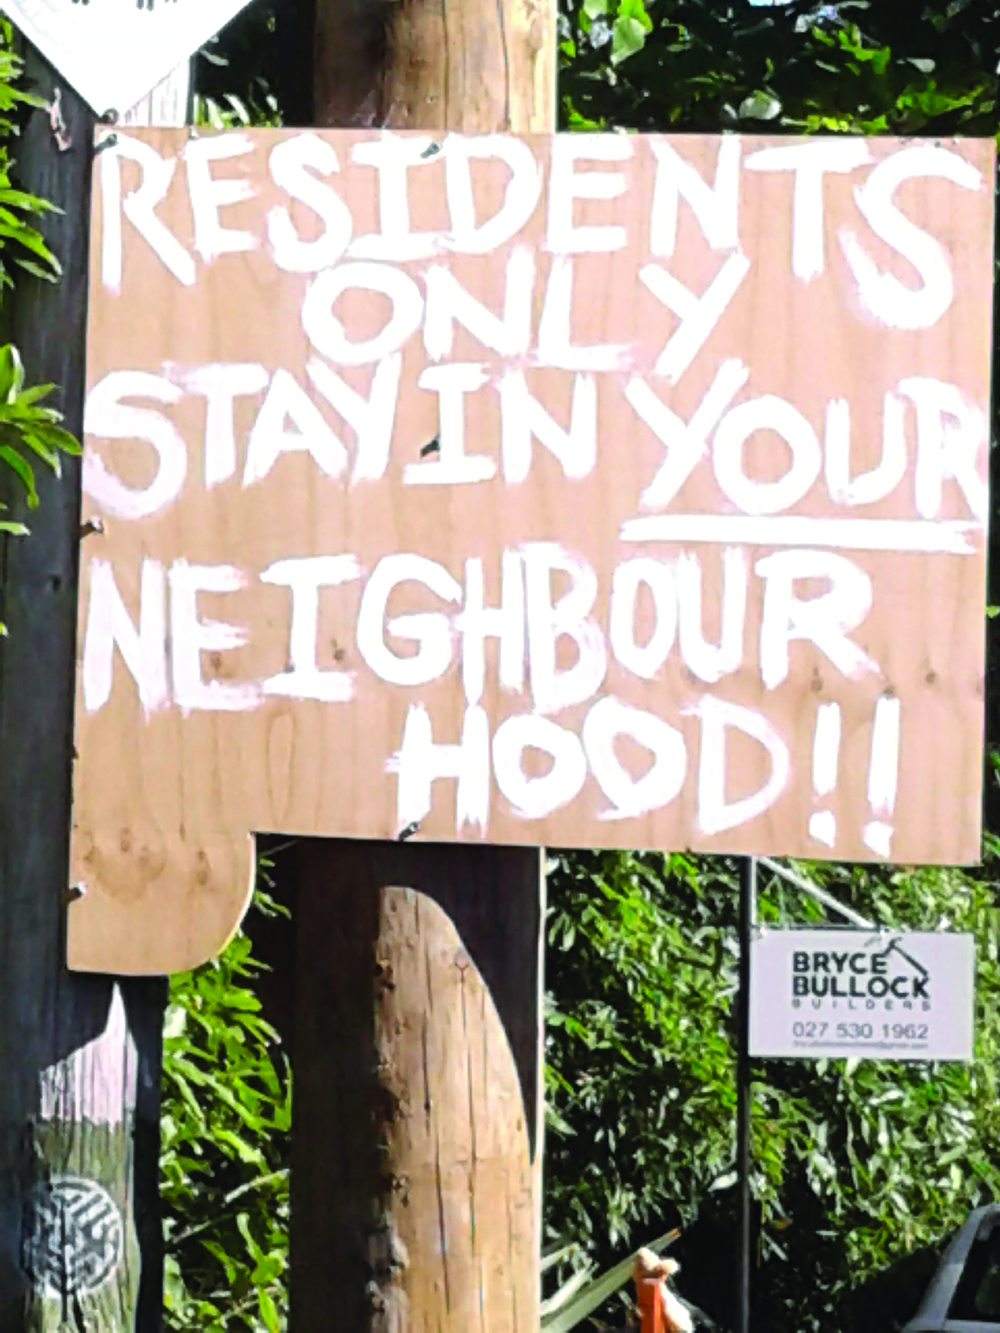 Warning to nonresidents to stay out of Piha, Auckland, June 2020. Photo by Susanna Trnka.